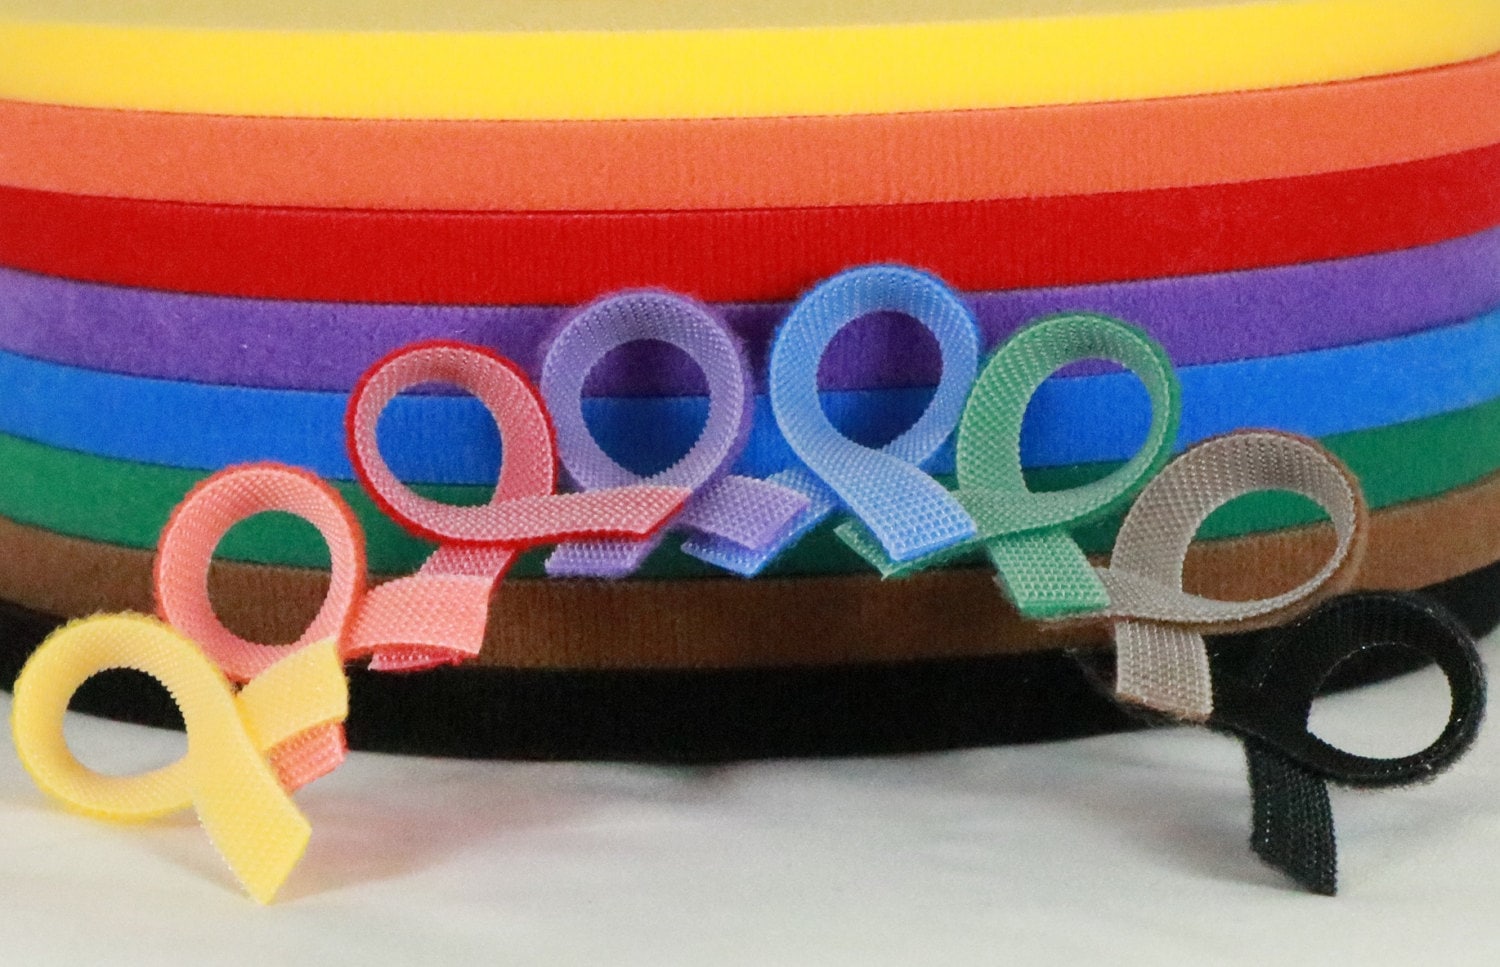 EXTRA Thin VELCRO ®/ 3 Yard Pack of Genuine VELCRO® Brand Sew-on Ultra Thin  Low Profile Hook & Loop for Doll Clothes /many Colors 